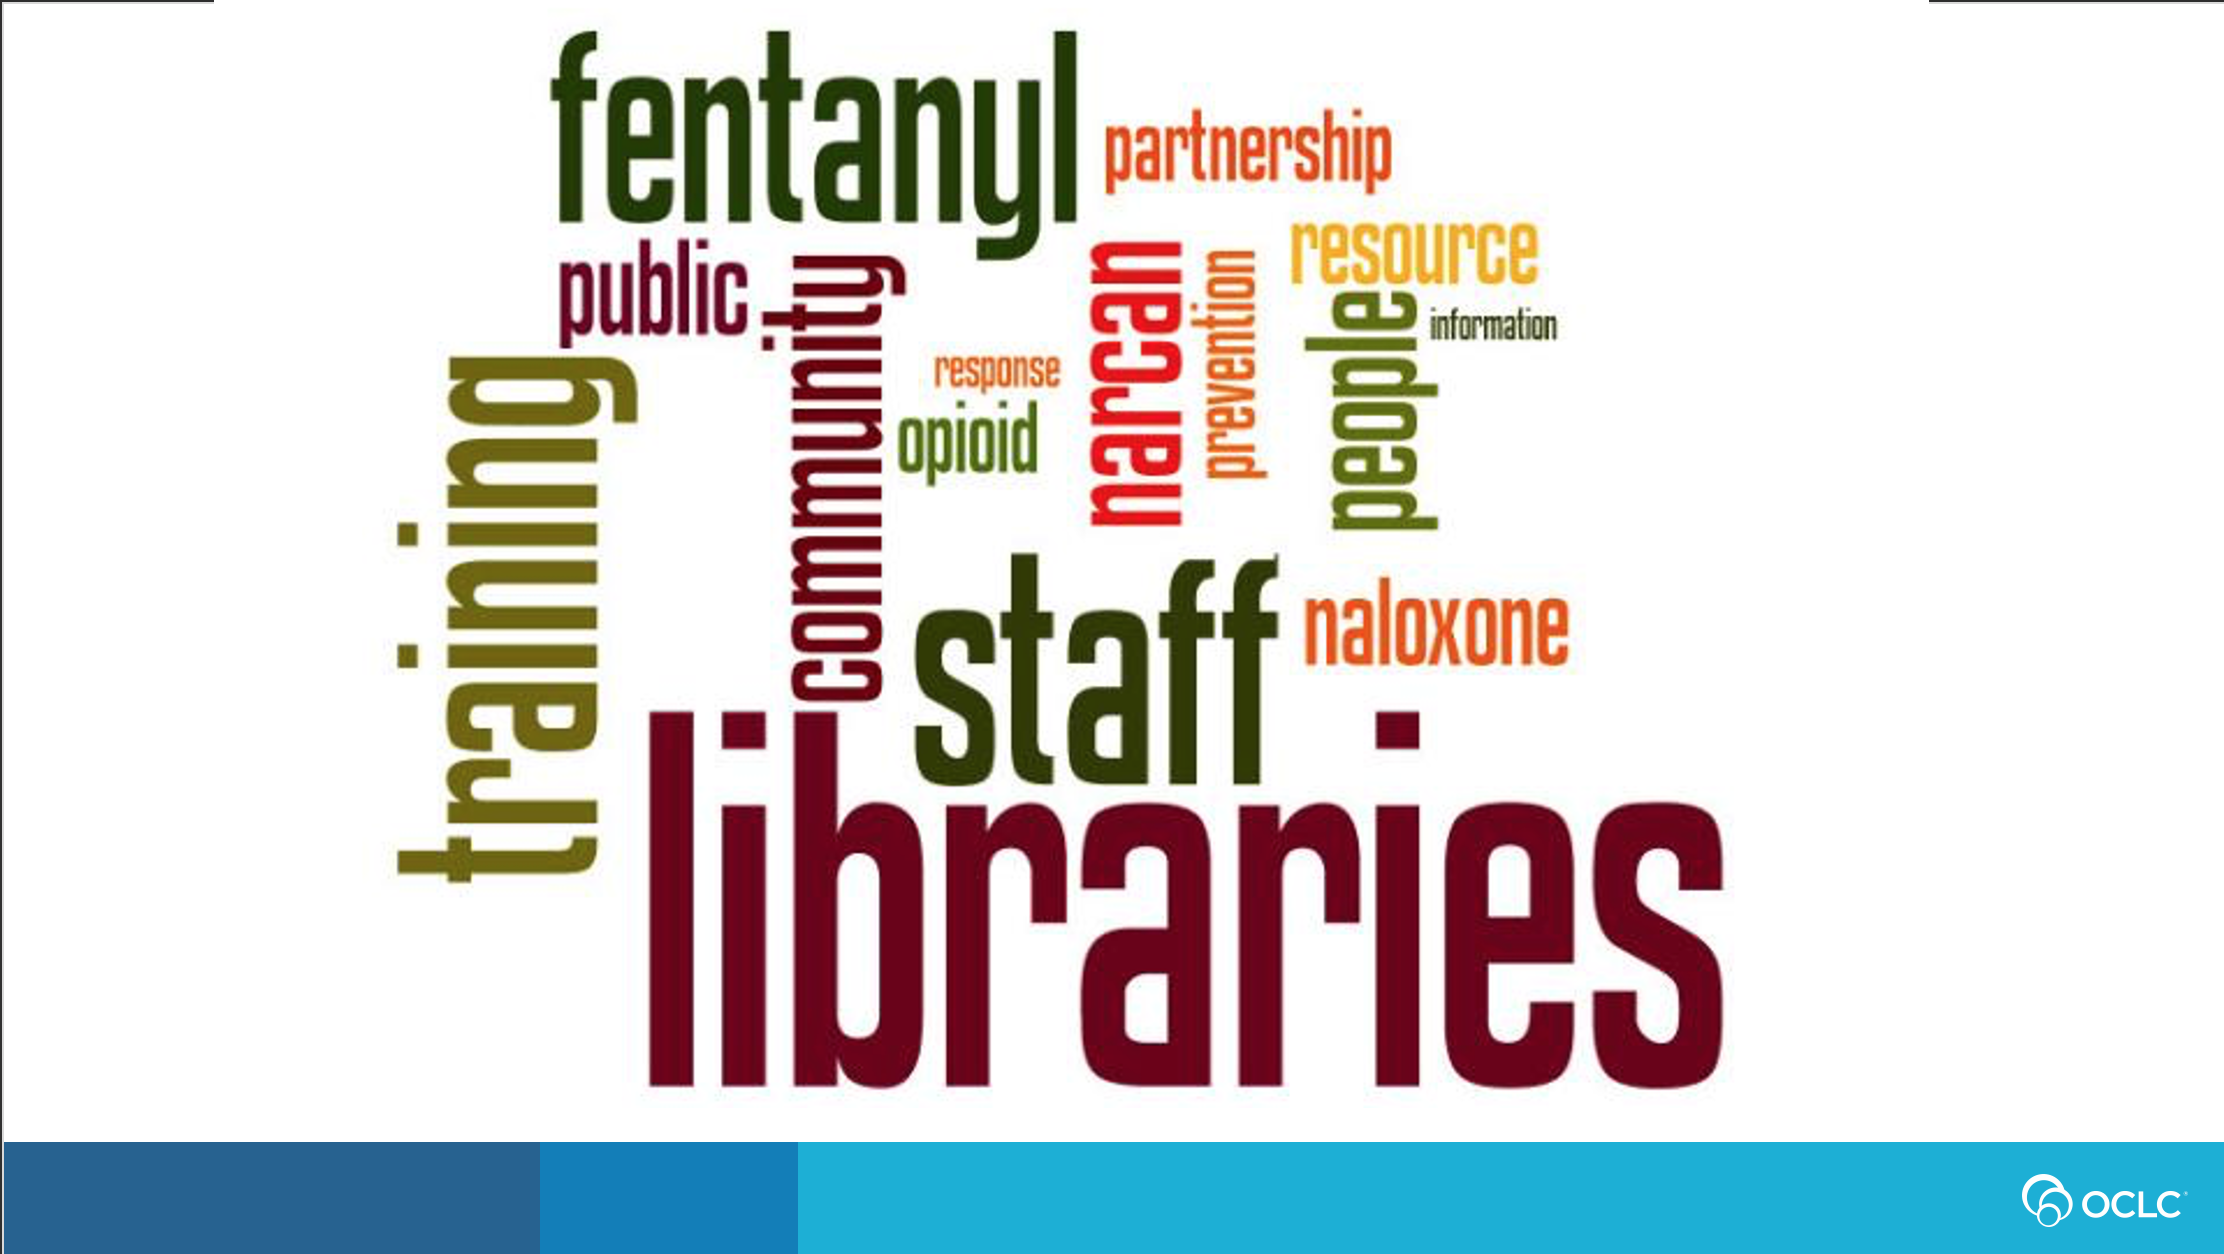 Public Libraries Respond to the Opioid Crisis with Their Community